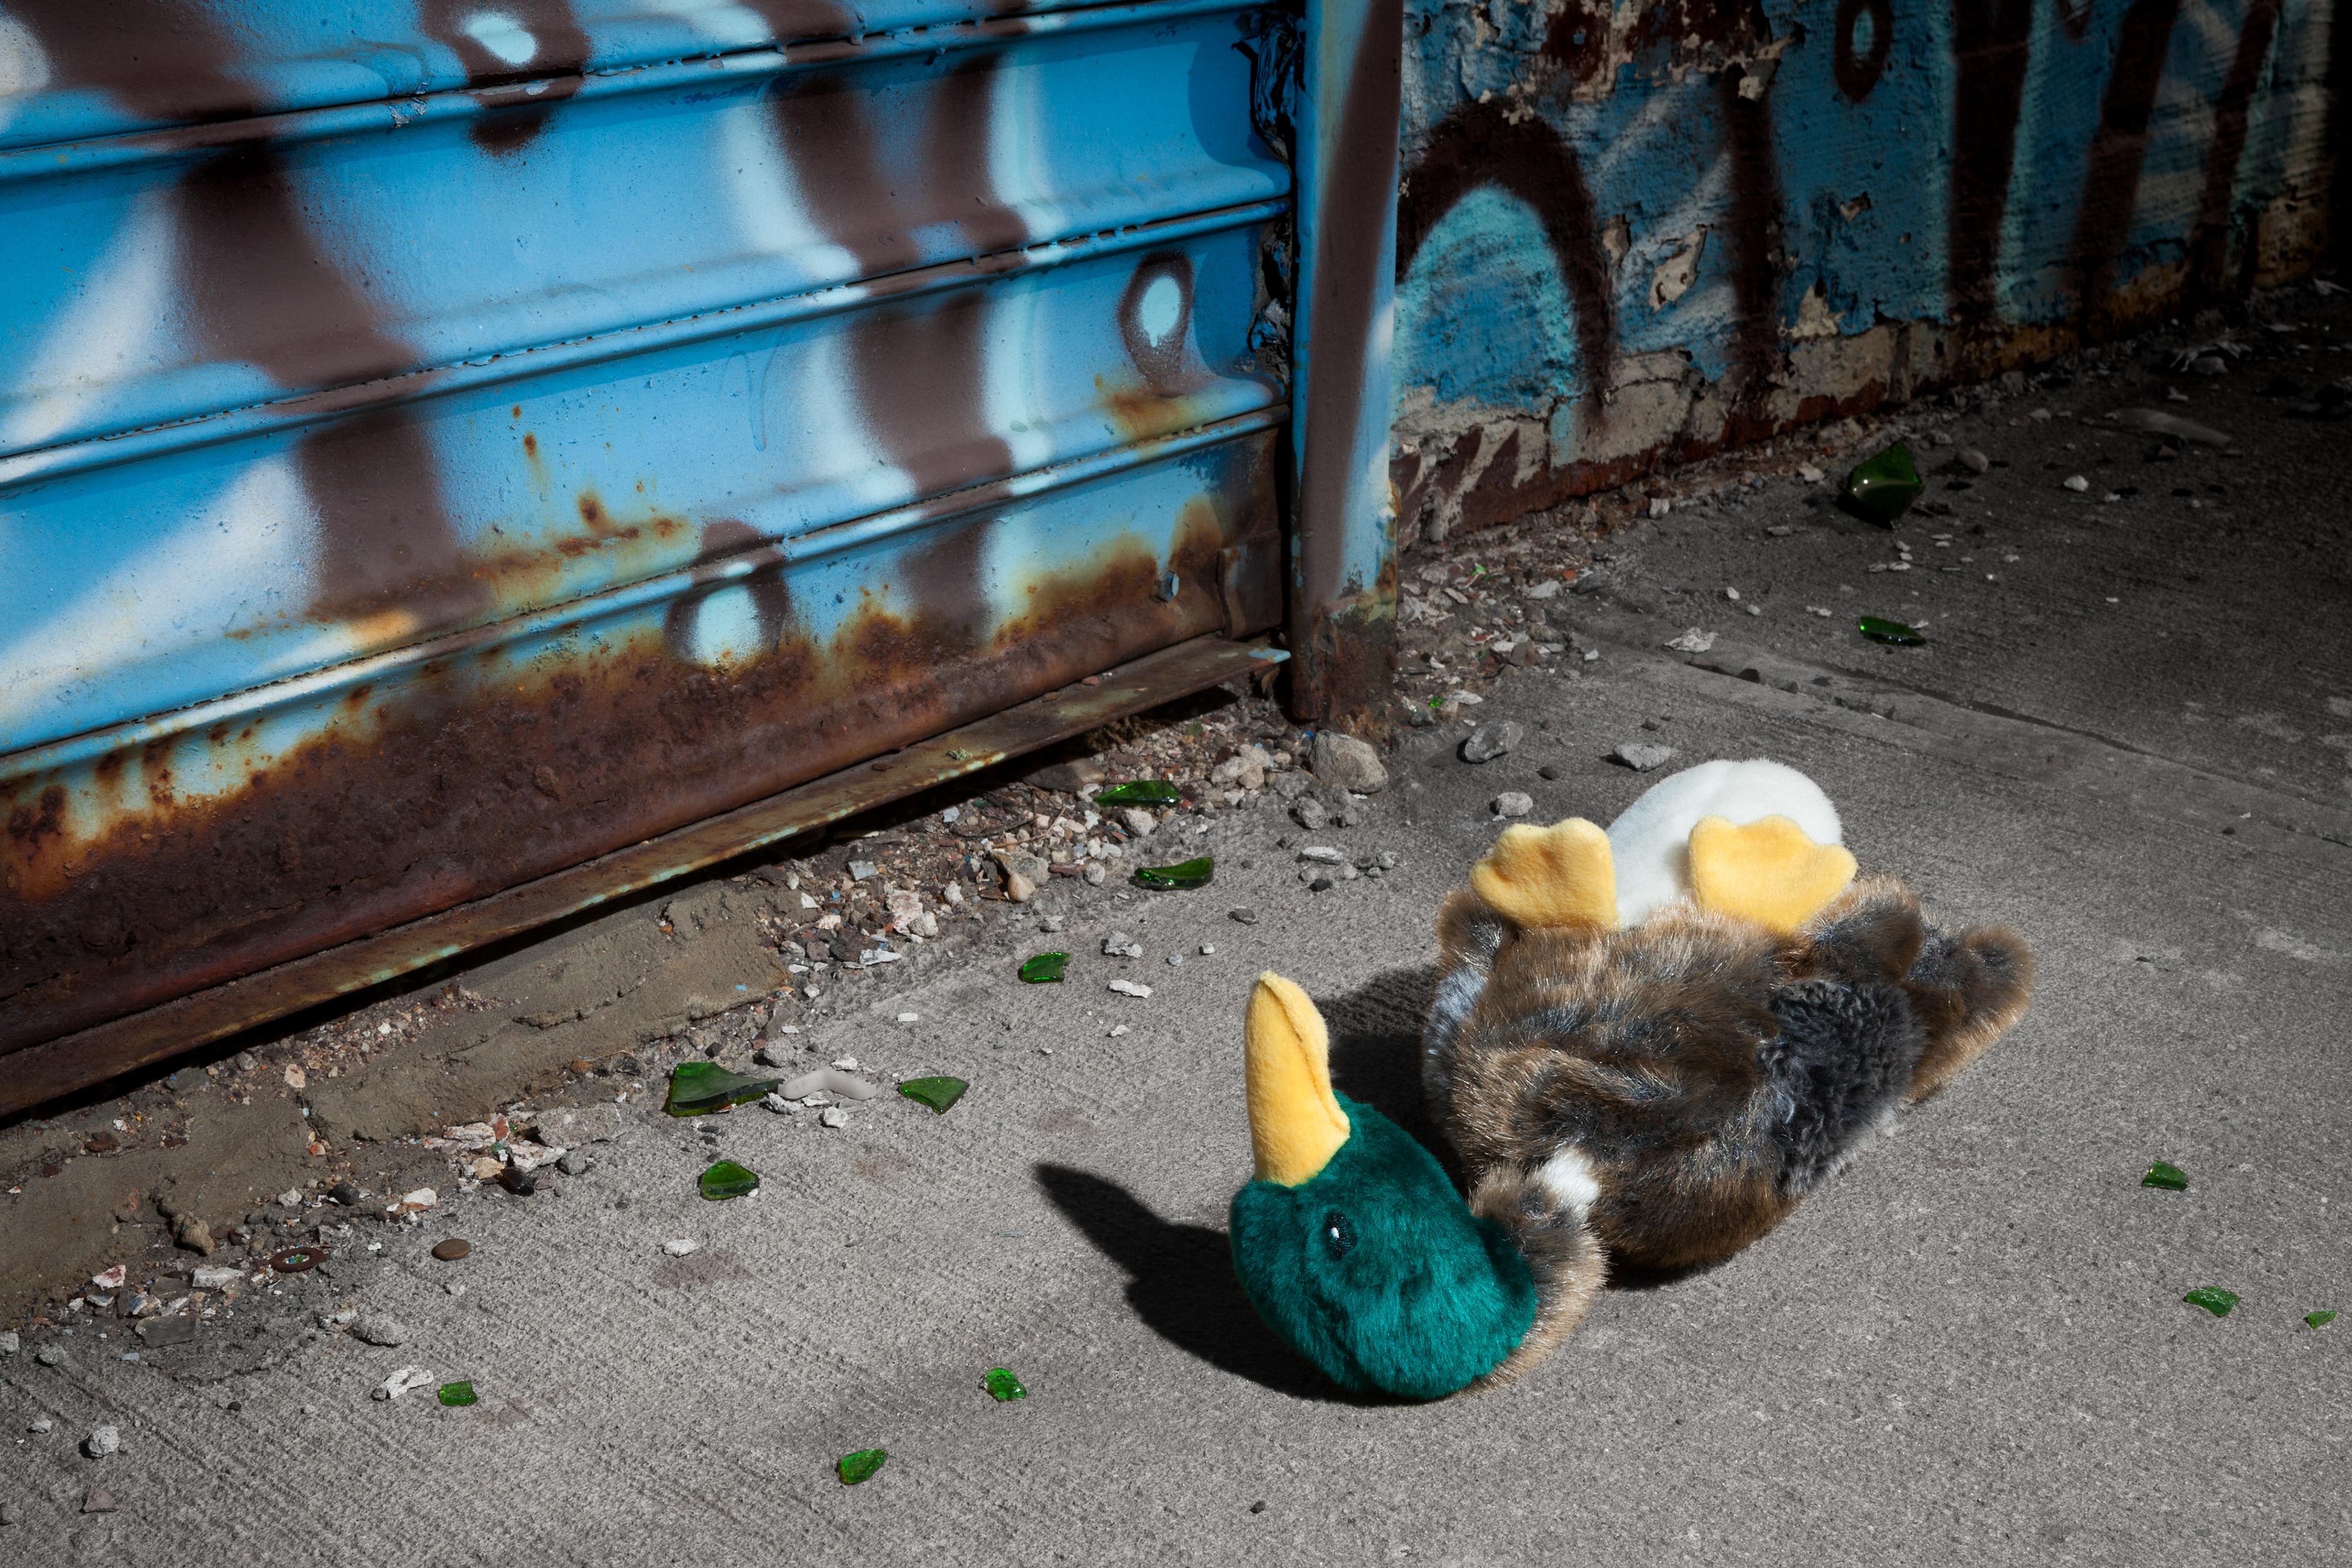 Jeanette May Color Photograph - “Morbidity & Mortality: Duck” Humorous Photograph of Dog Toy in Crime Scene 